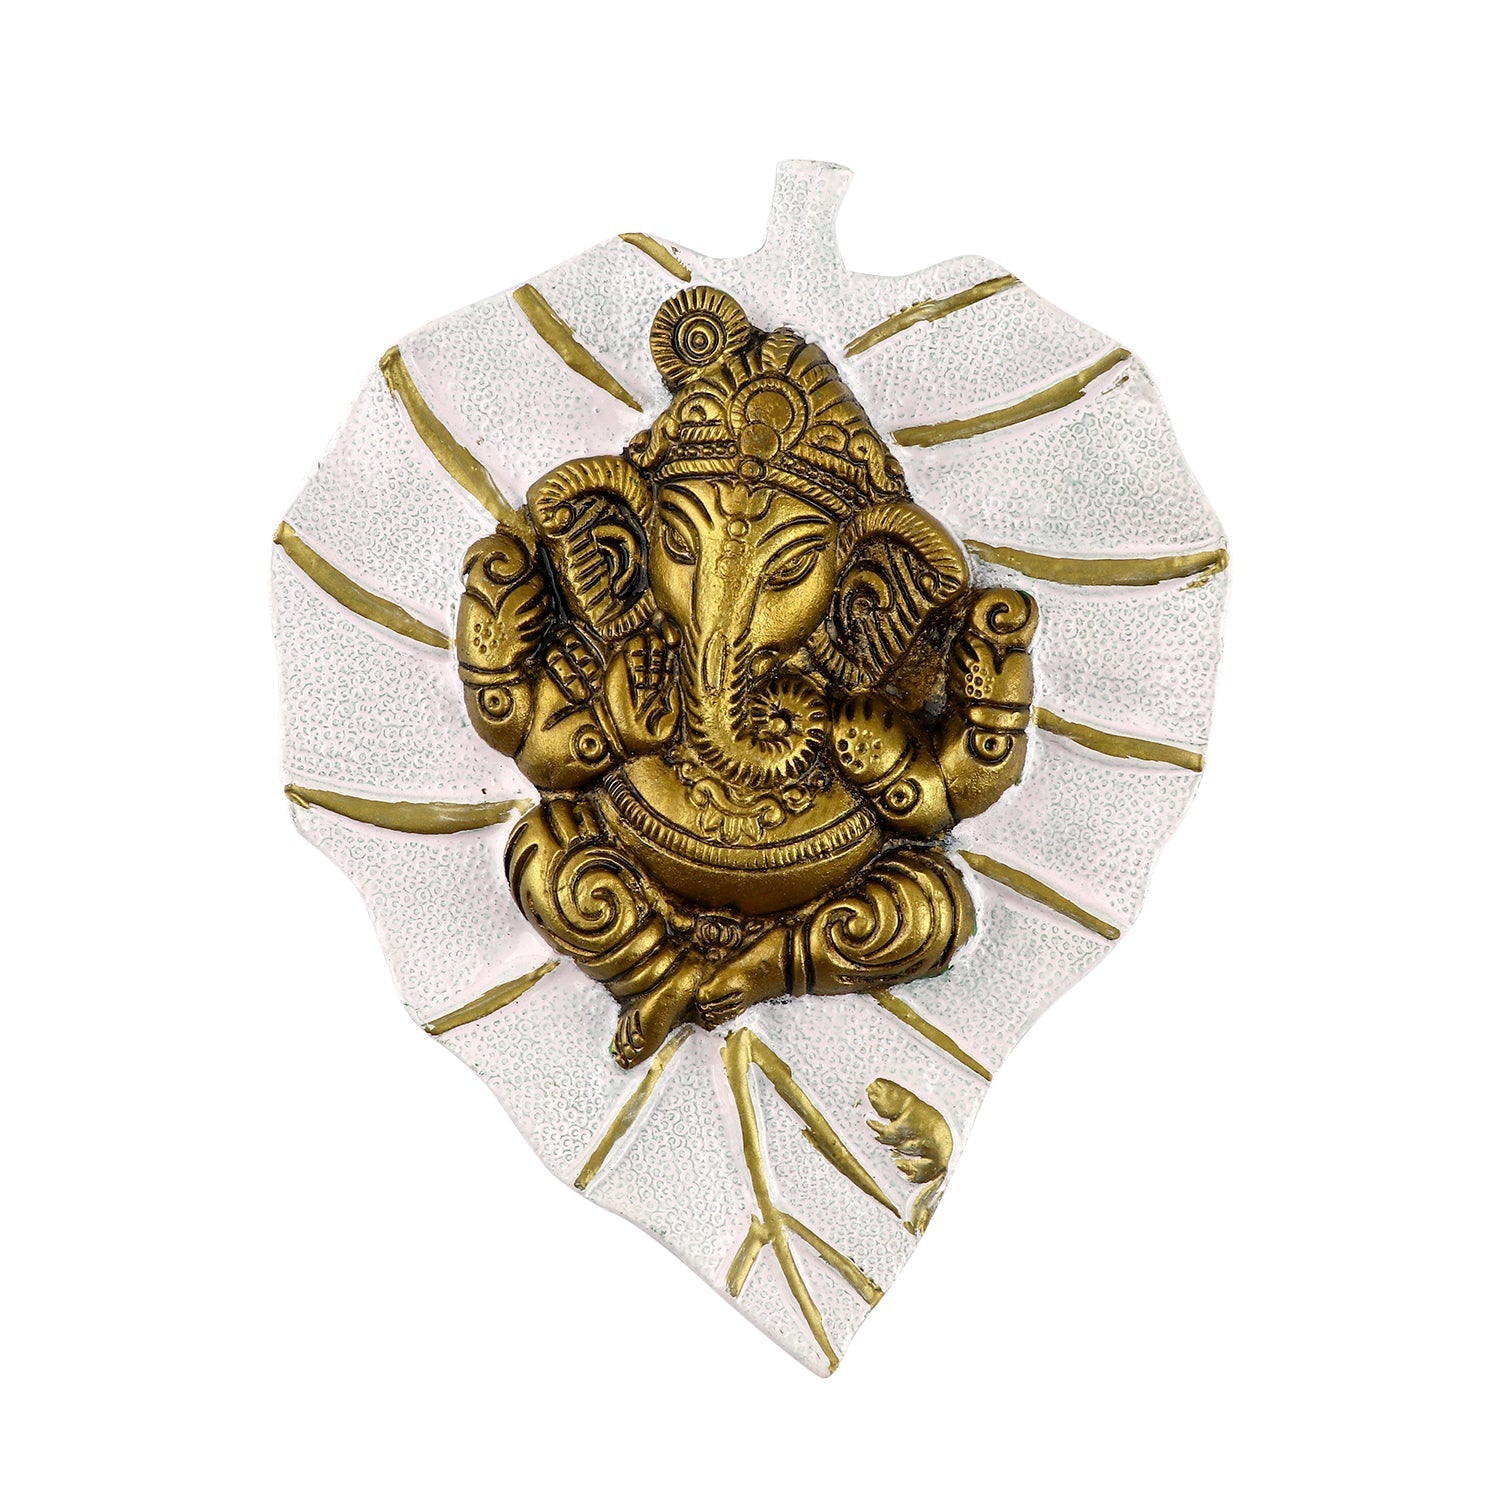 1 pc Lord Ganesh on Leaf Patta Wall Hanging White